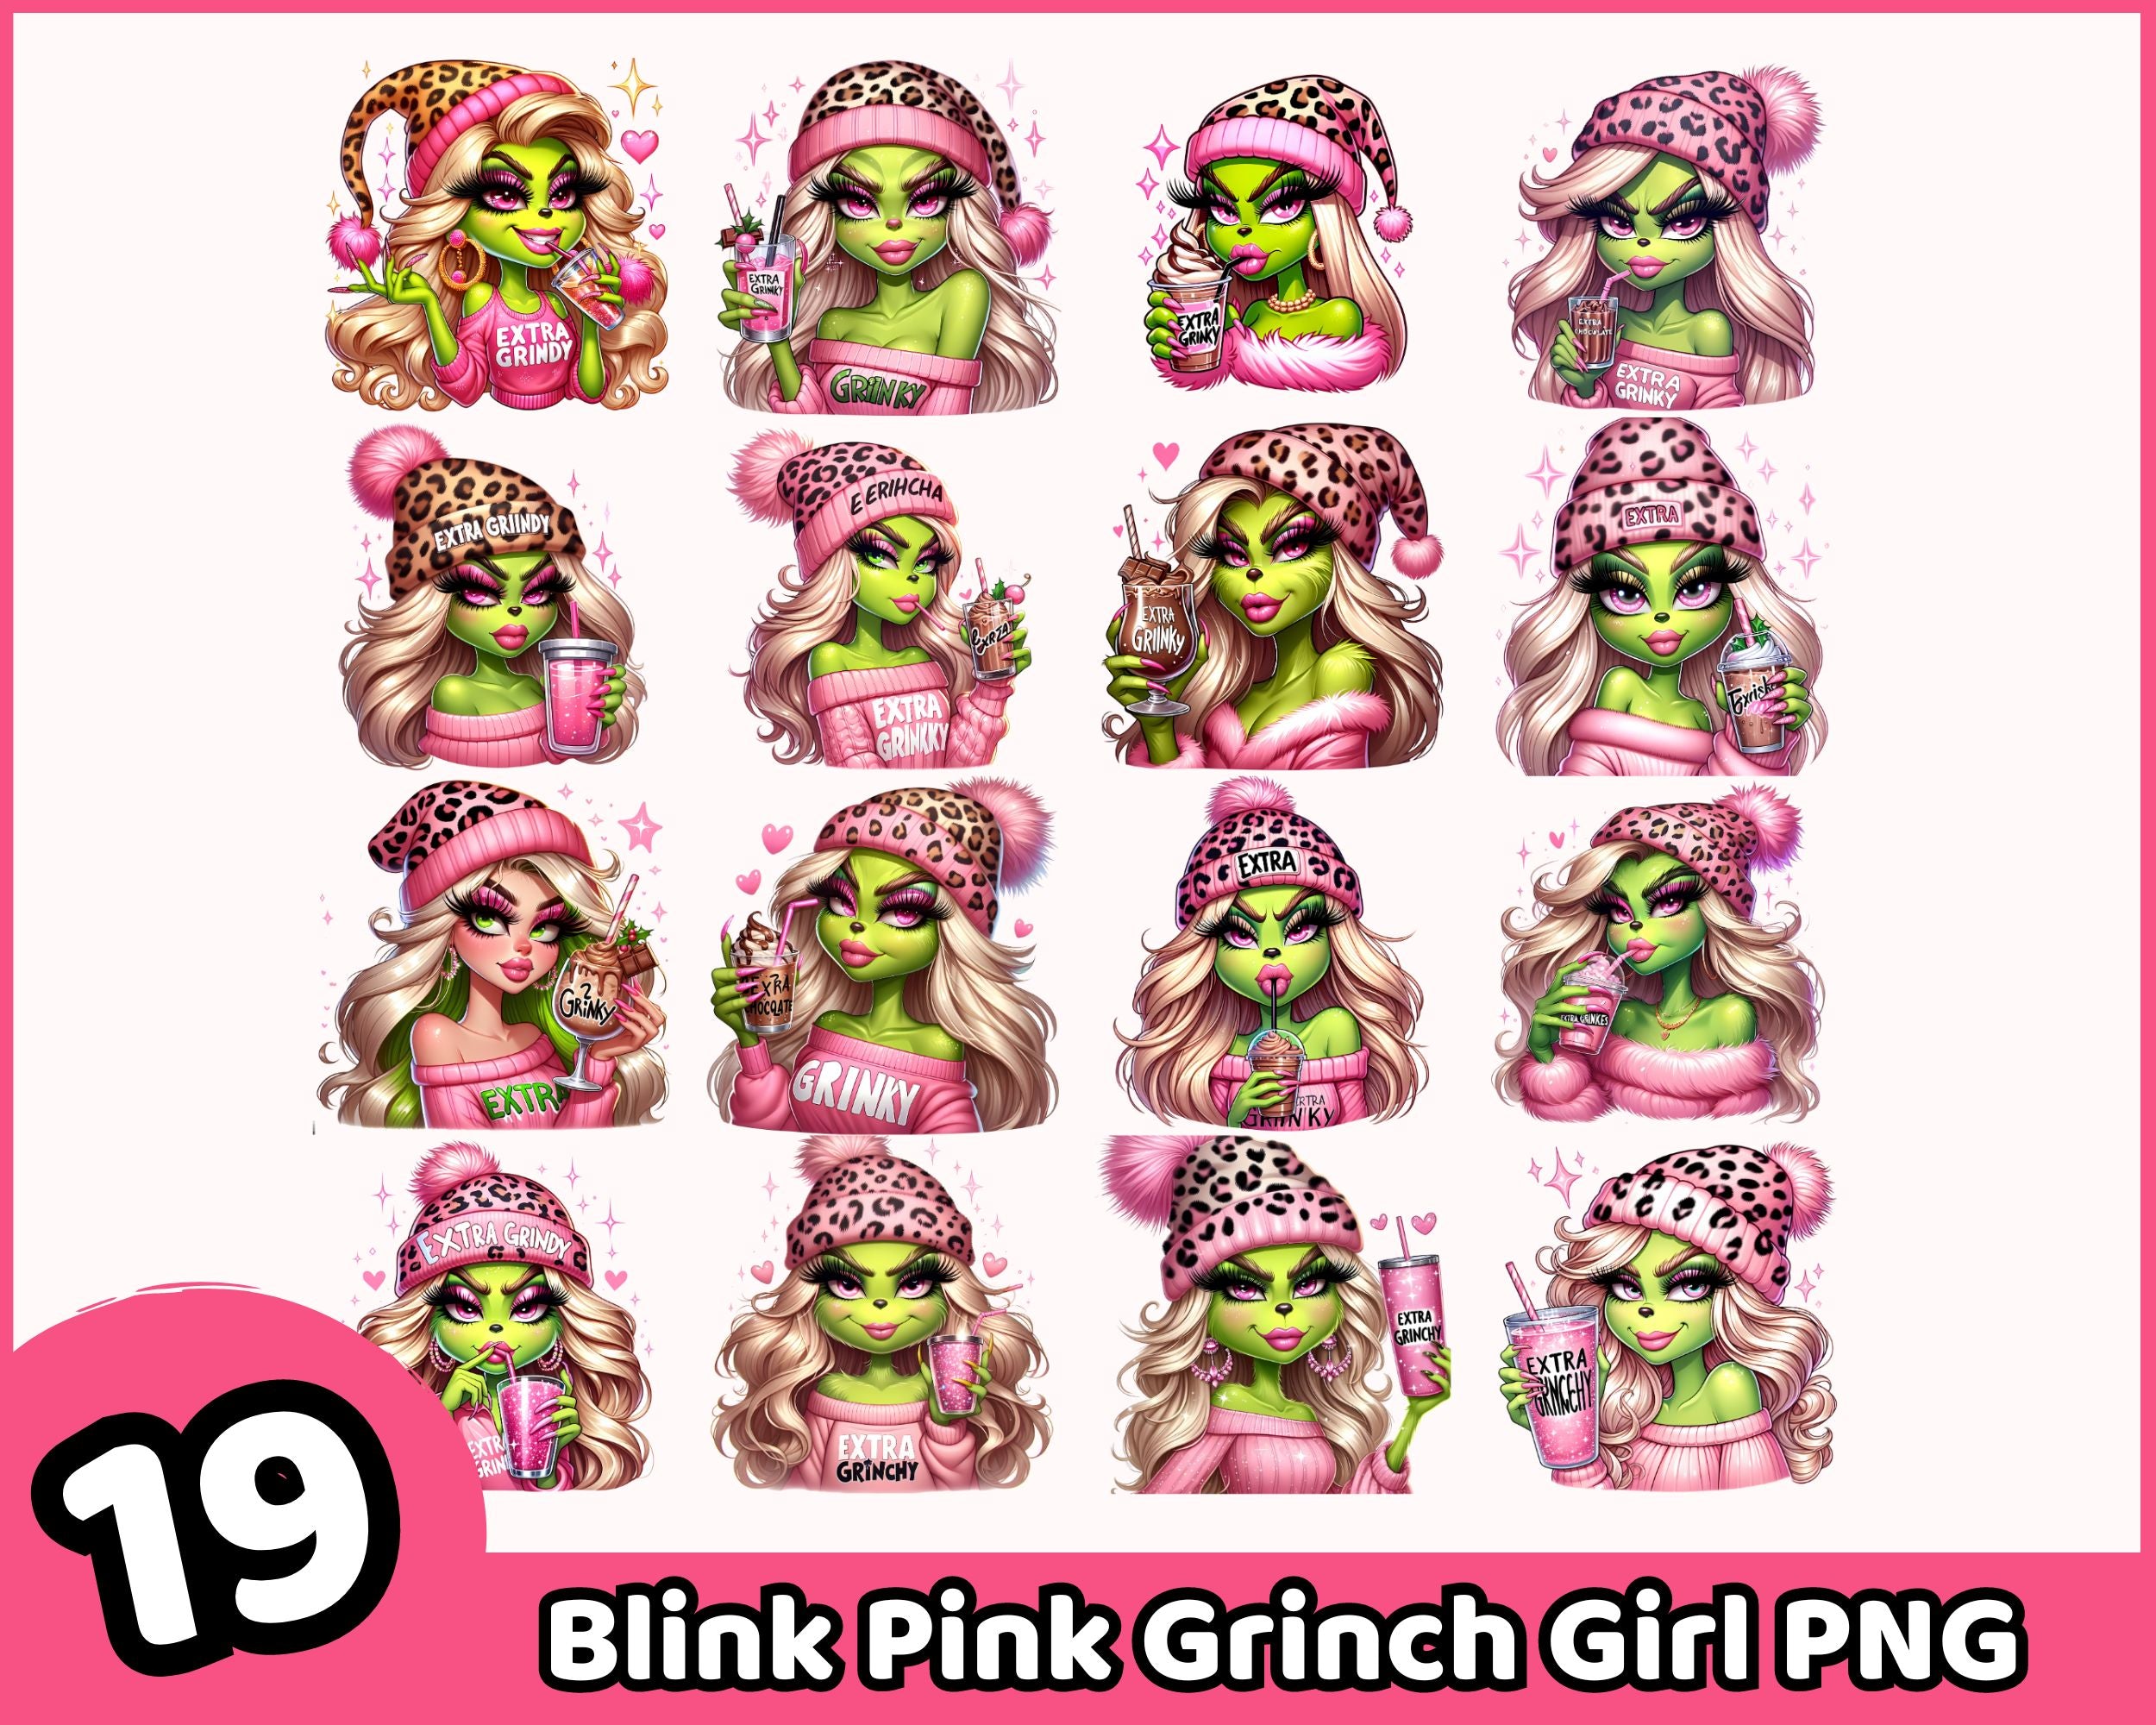 Pink Boujee Grinch Png, Cute Girl Grinch Png, Cheetah Print, Christmas Png, Super cute Grinch Png